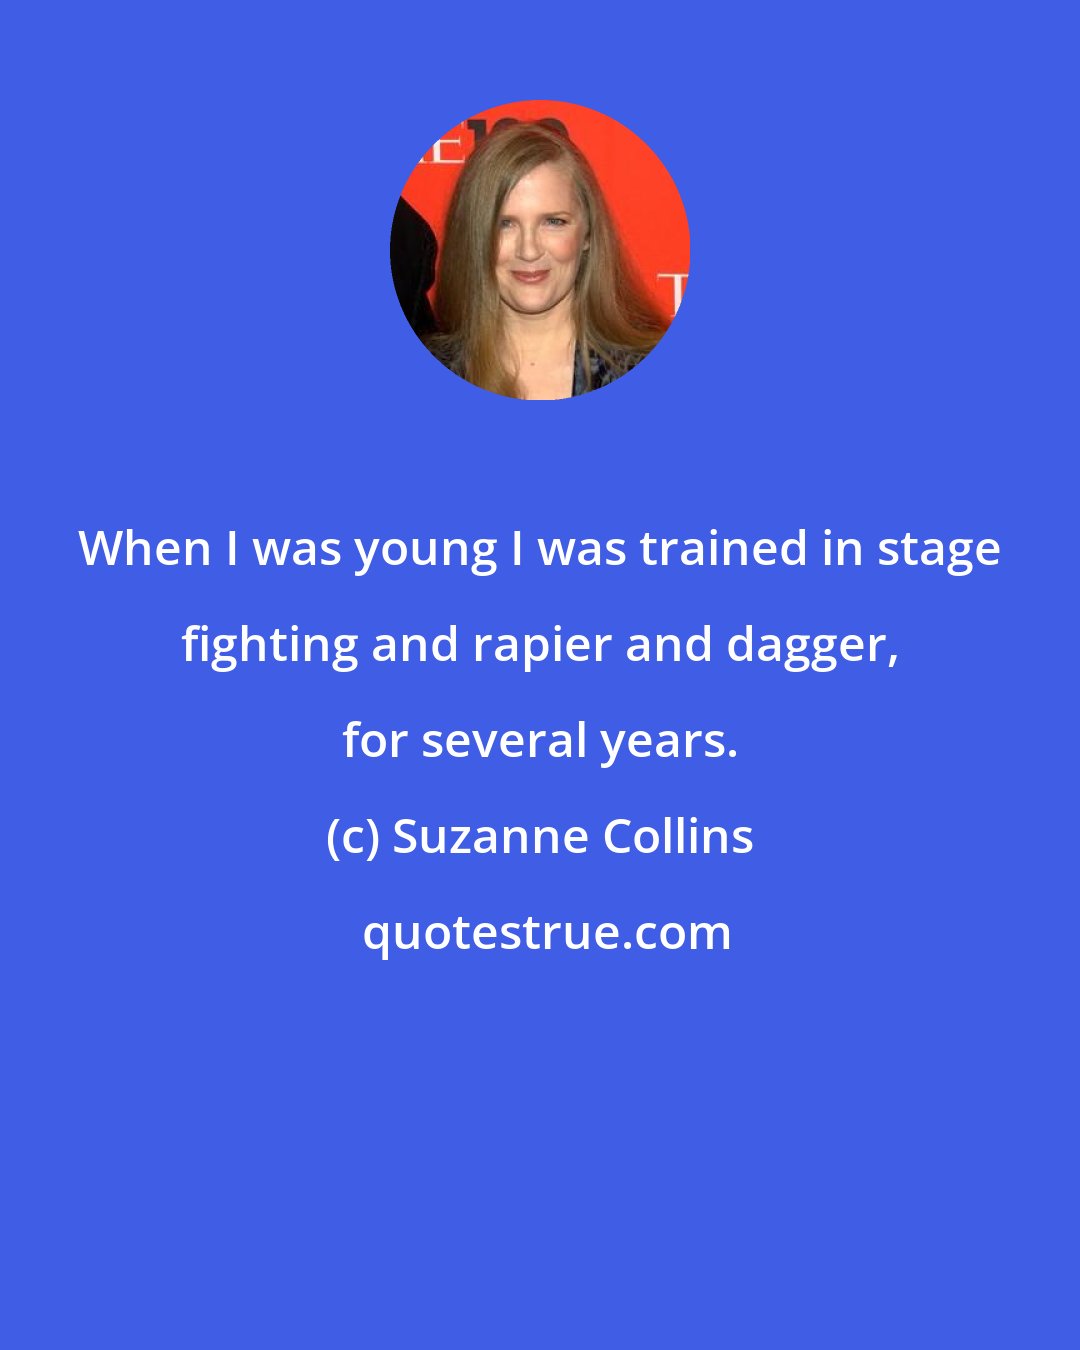 Suzanne Collins: When I was young I was trained in stage fighting and rapier and dagger, for several years.